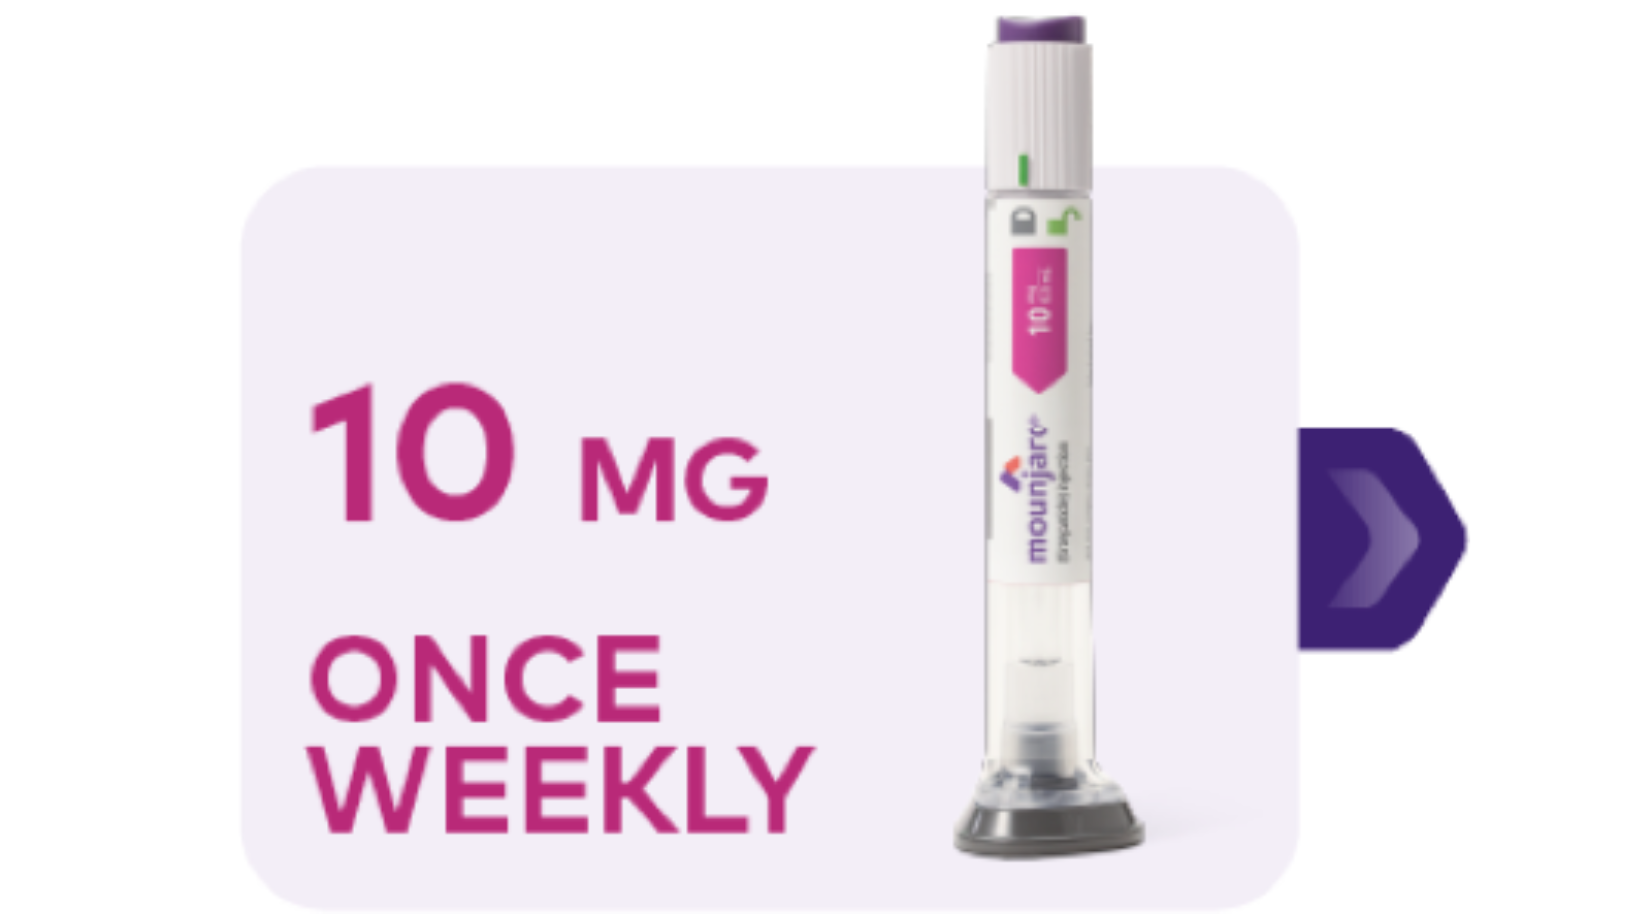 New miracle weight loss injection lands in Spain: Ozempic alternative costs 271 per month with patients losing up to 24kg [Video]